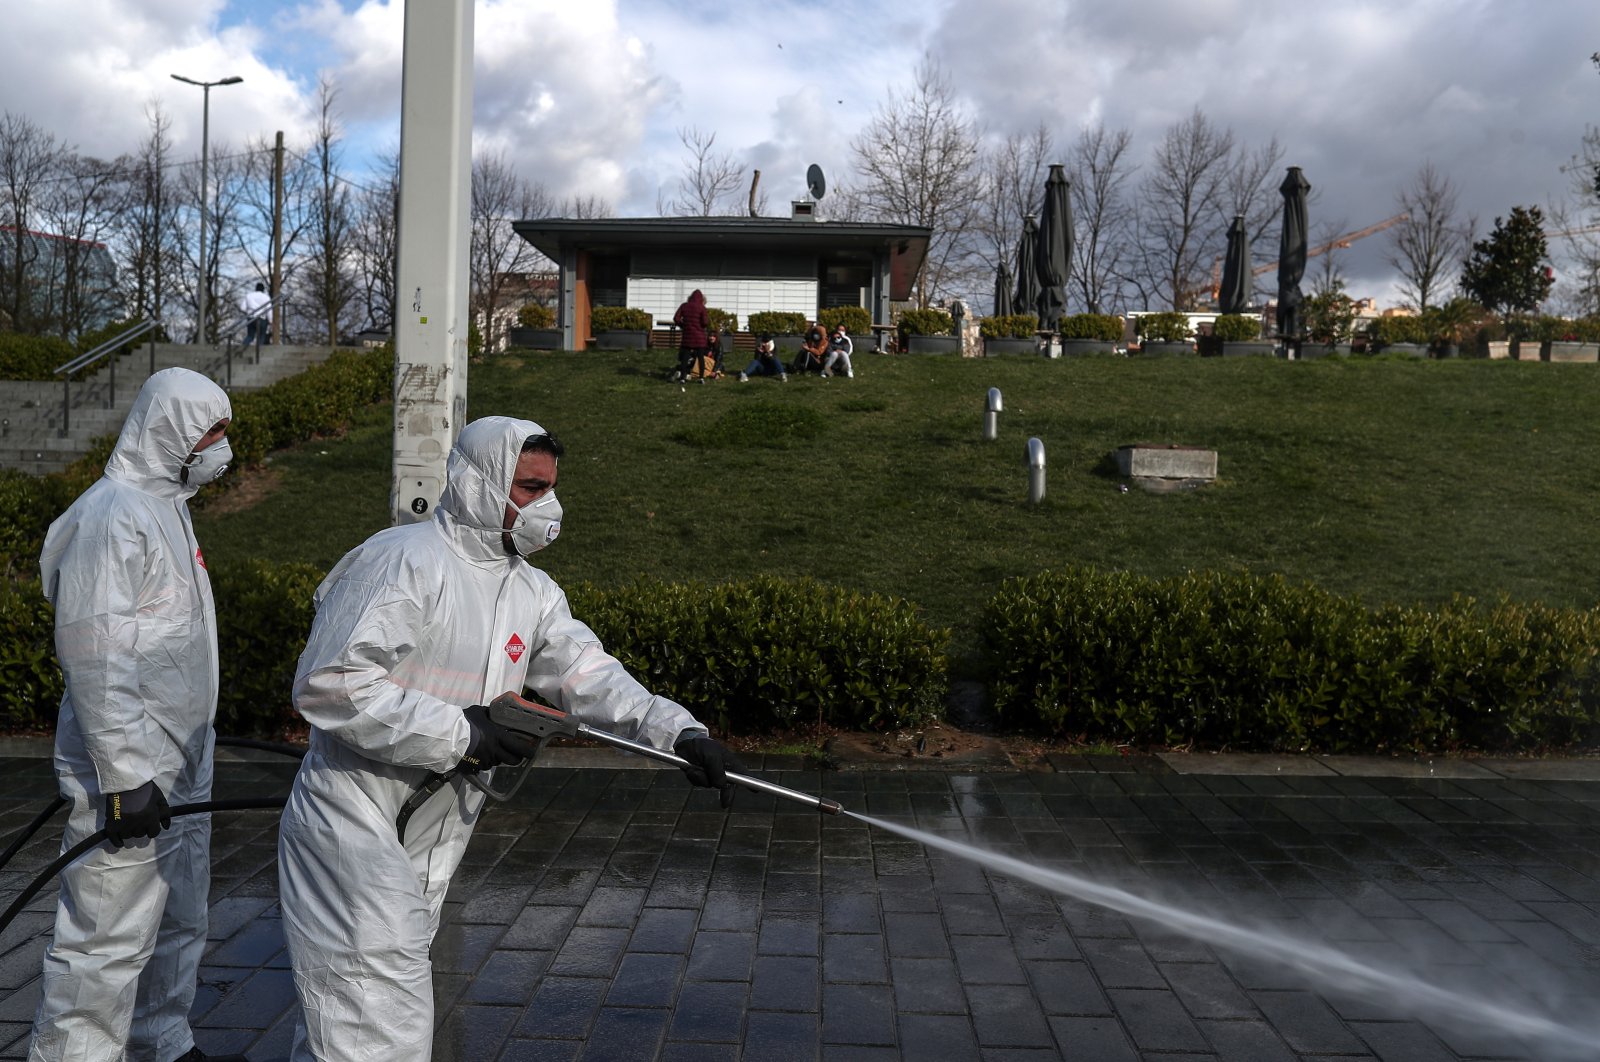 Employees of the Istanbul Metropolitan Municipality disinfects near Gezi Park to prevent the spread of the novel coronavirus COVID-19 at the Taksim Square in Istanbul, Turkey, 18 March 2020. (EPA Photo)